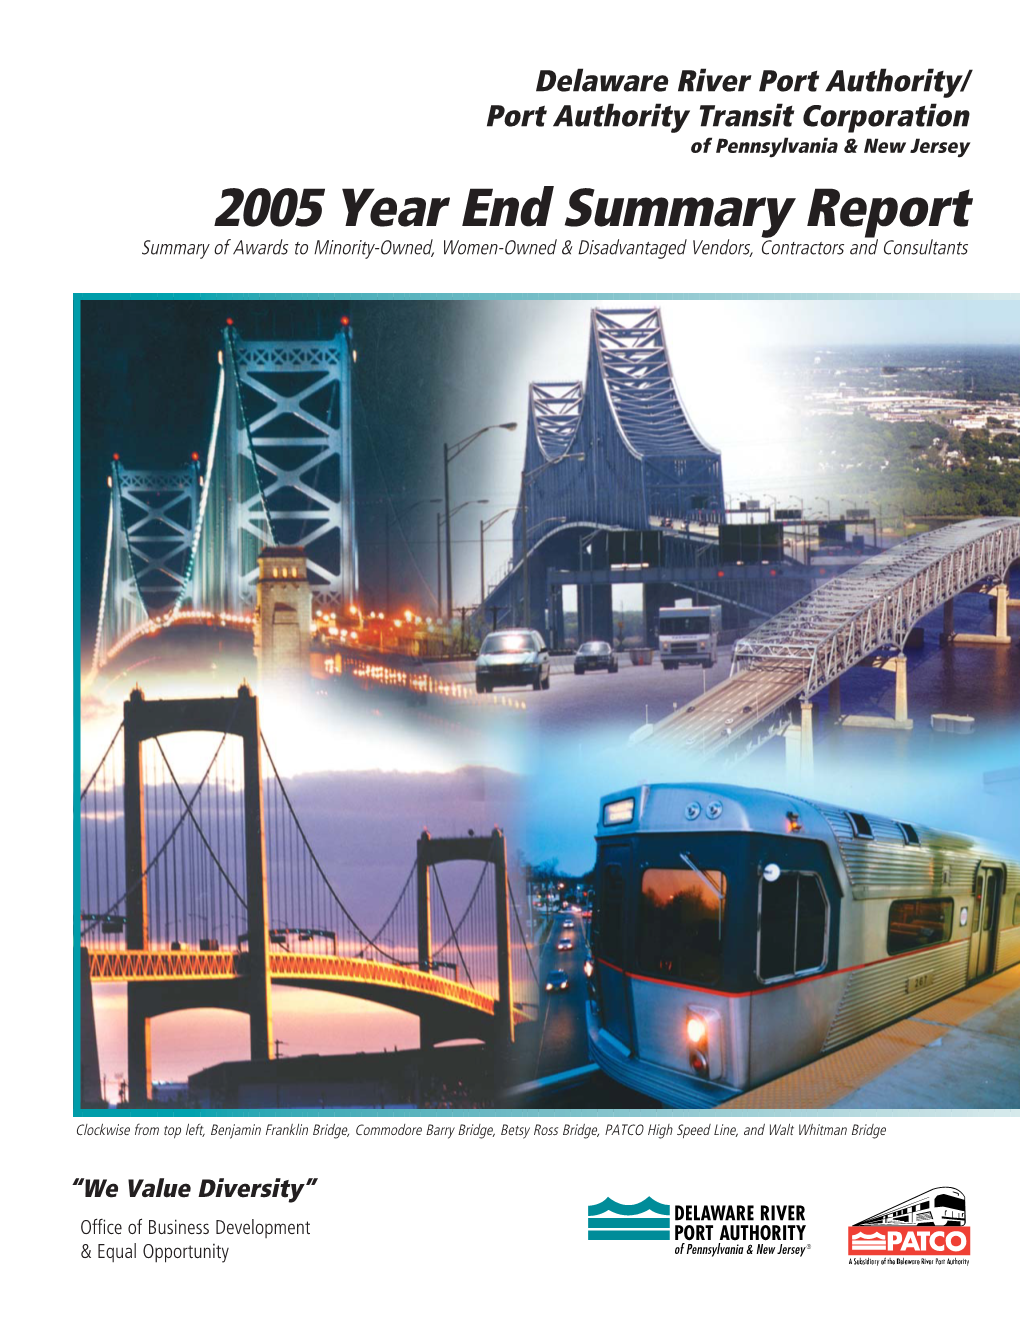 2005 Year End Summary Report Summary of Awards to Minority-Owned, Women-Owned & Disadvantaged Vendors, Contractors and Consultants